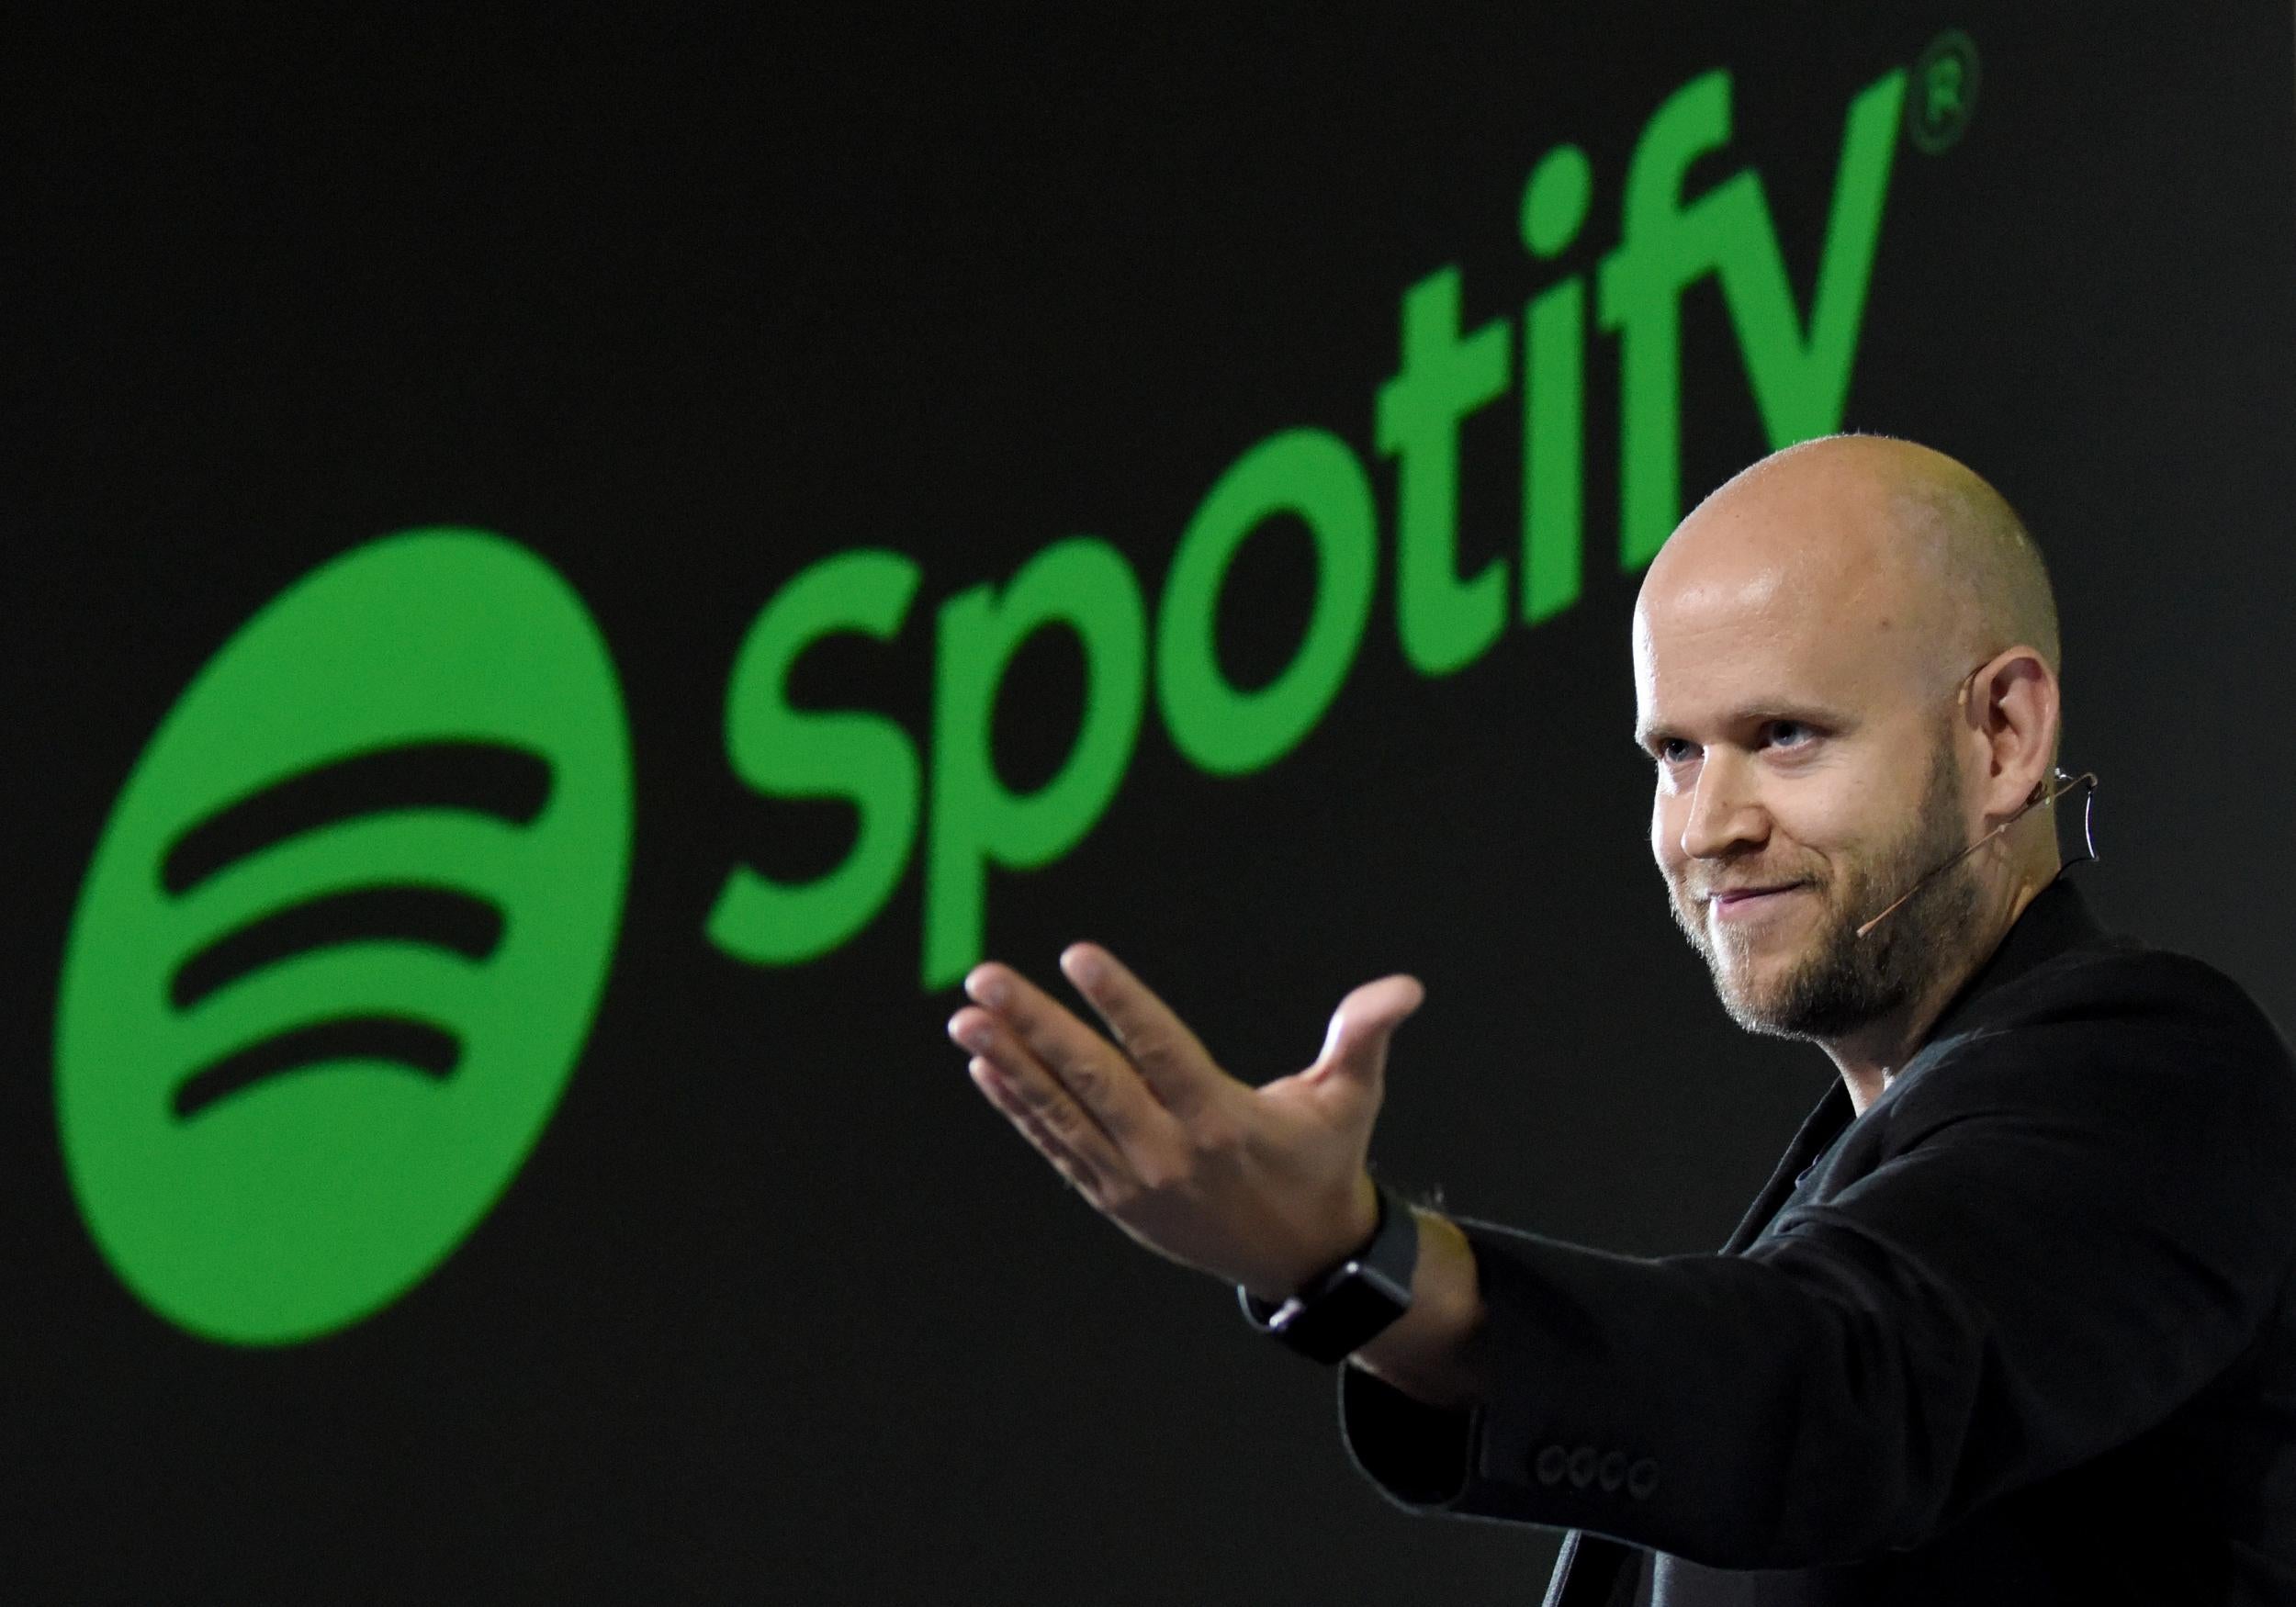 By avoiding raising fresh money from the stock market, the streaming service’s co-founder, Daniel Ek, will swerve having to pay banks to ‘underwrite’ its shares